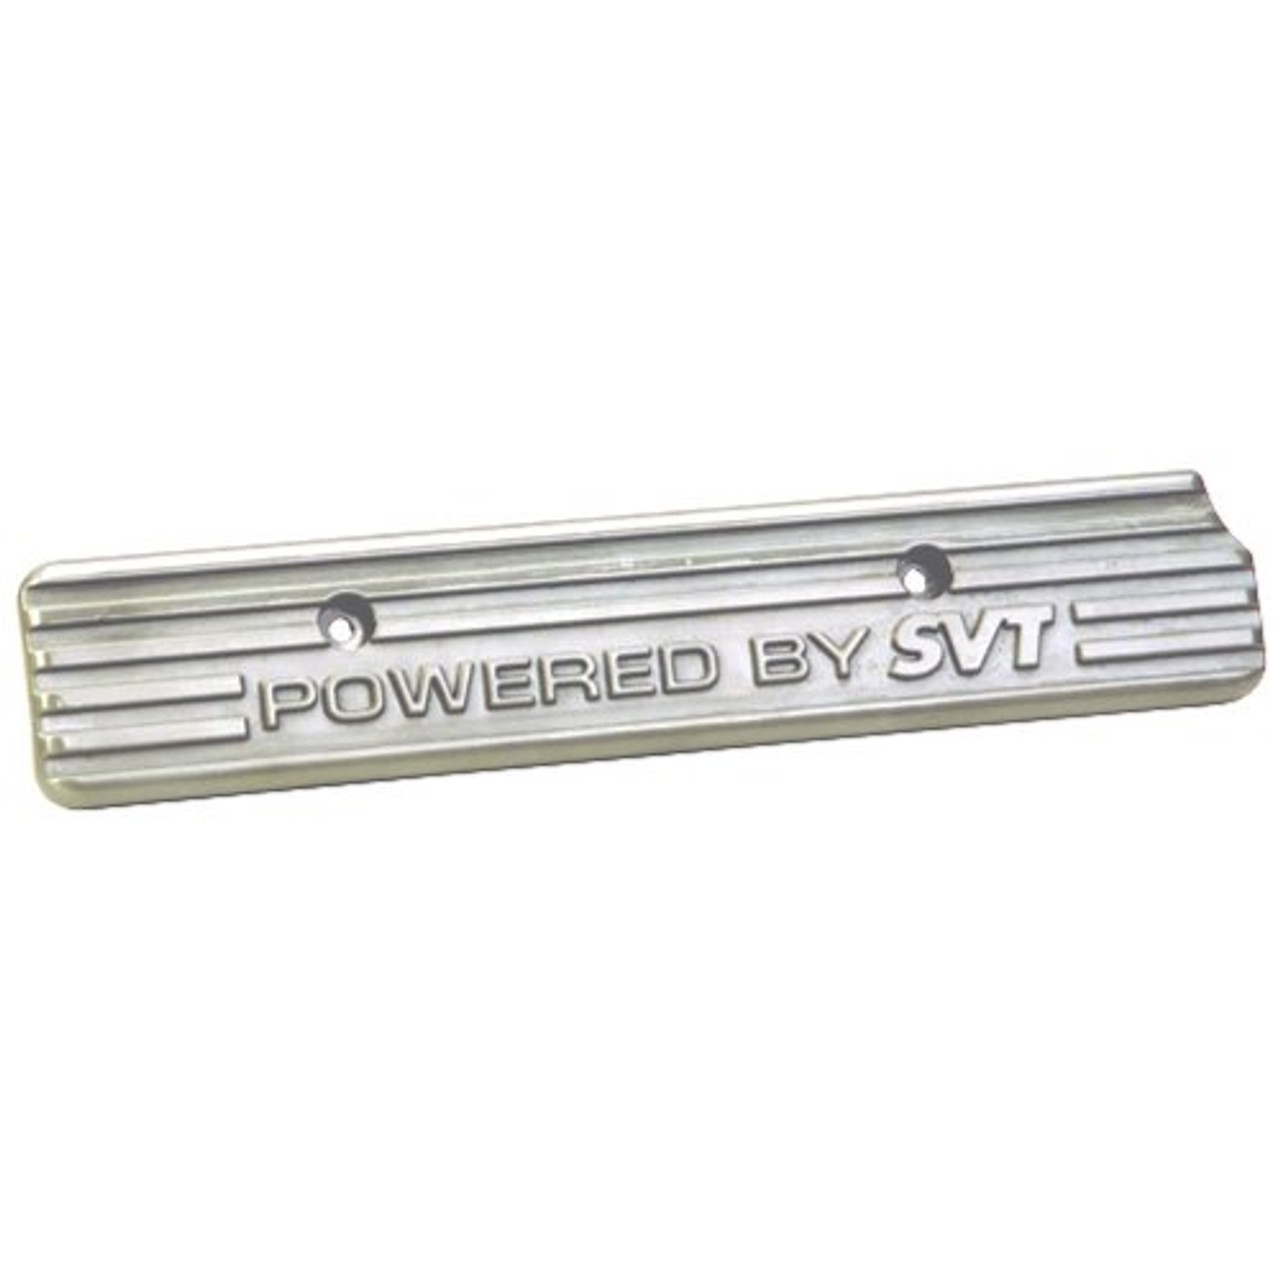 "Powered by SVT" Coil Covers